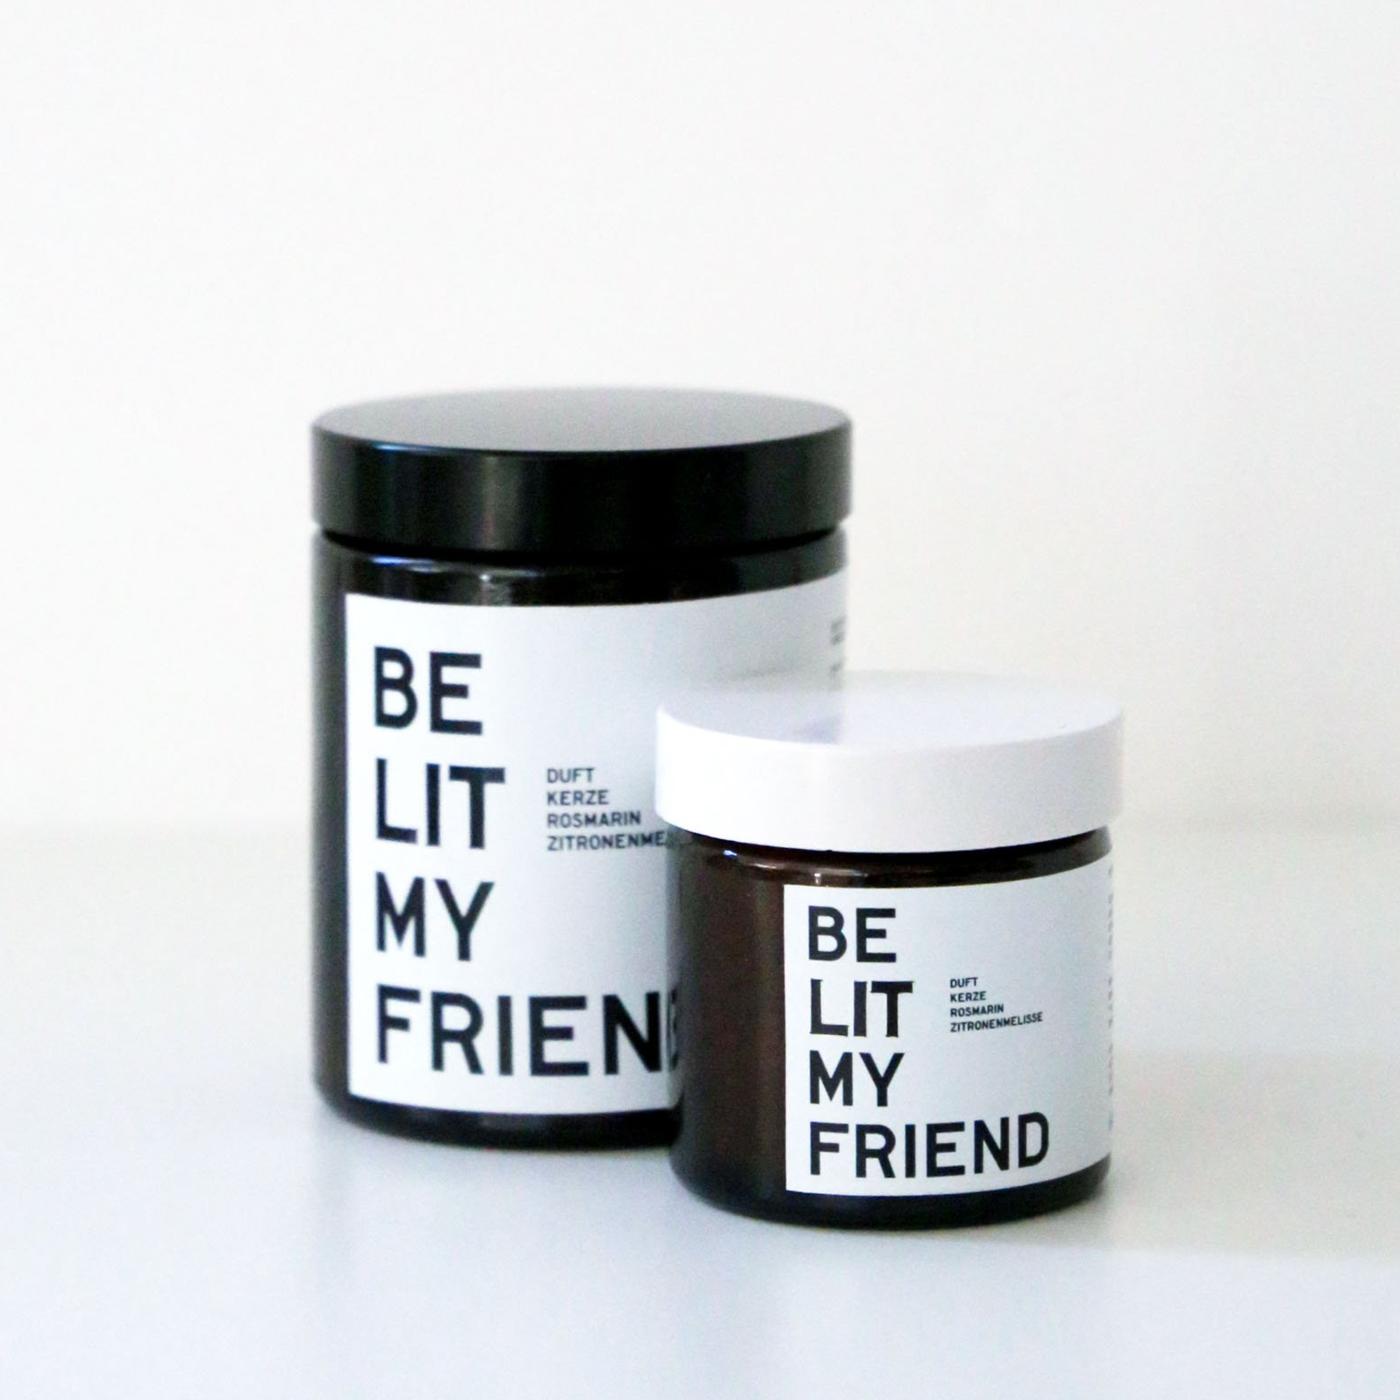 Be Lit My Friend Scented Candle Dublin Delivery Ireland